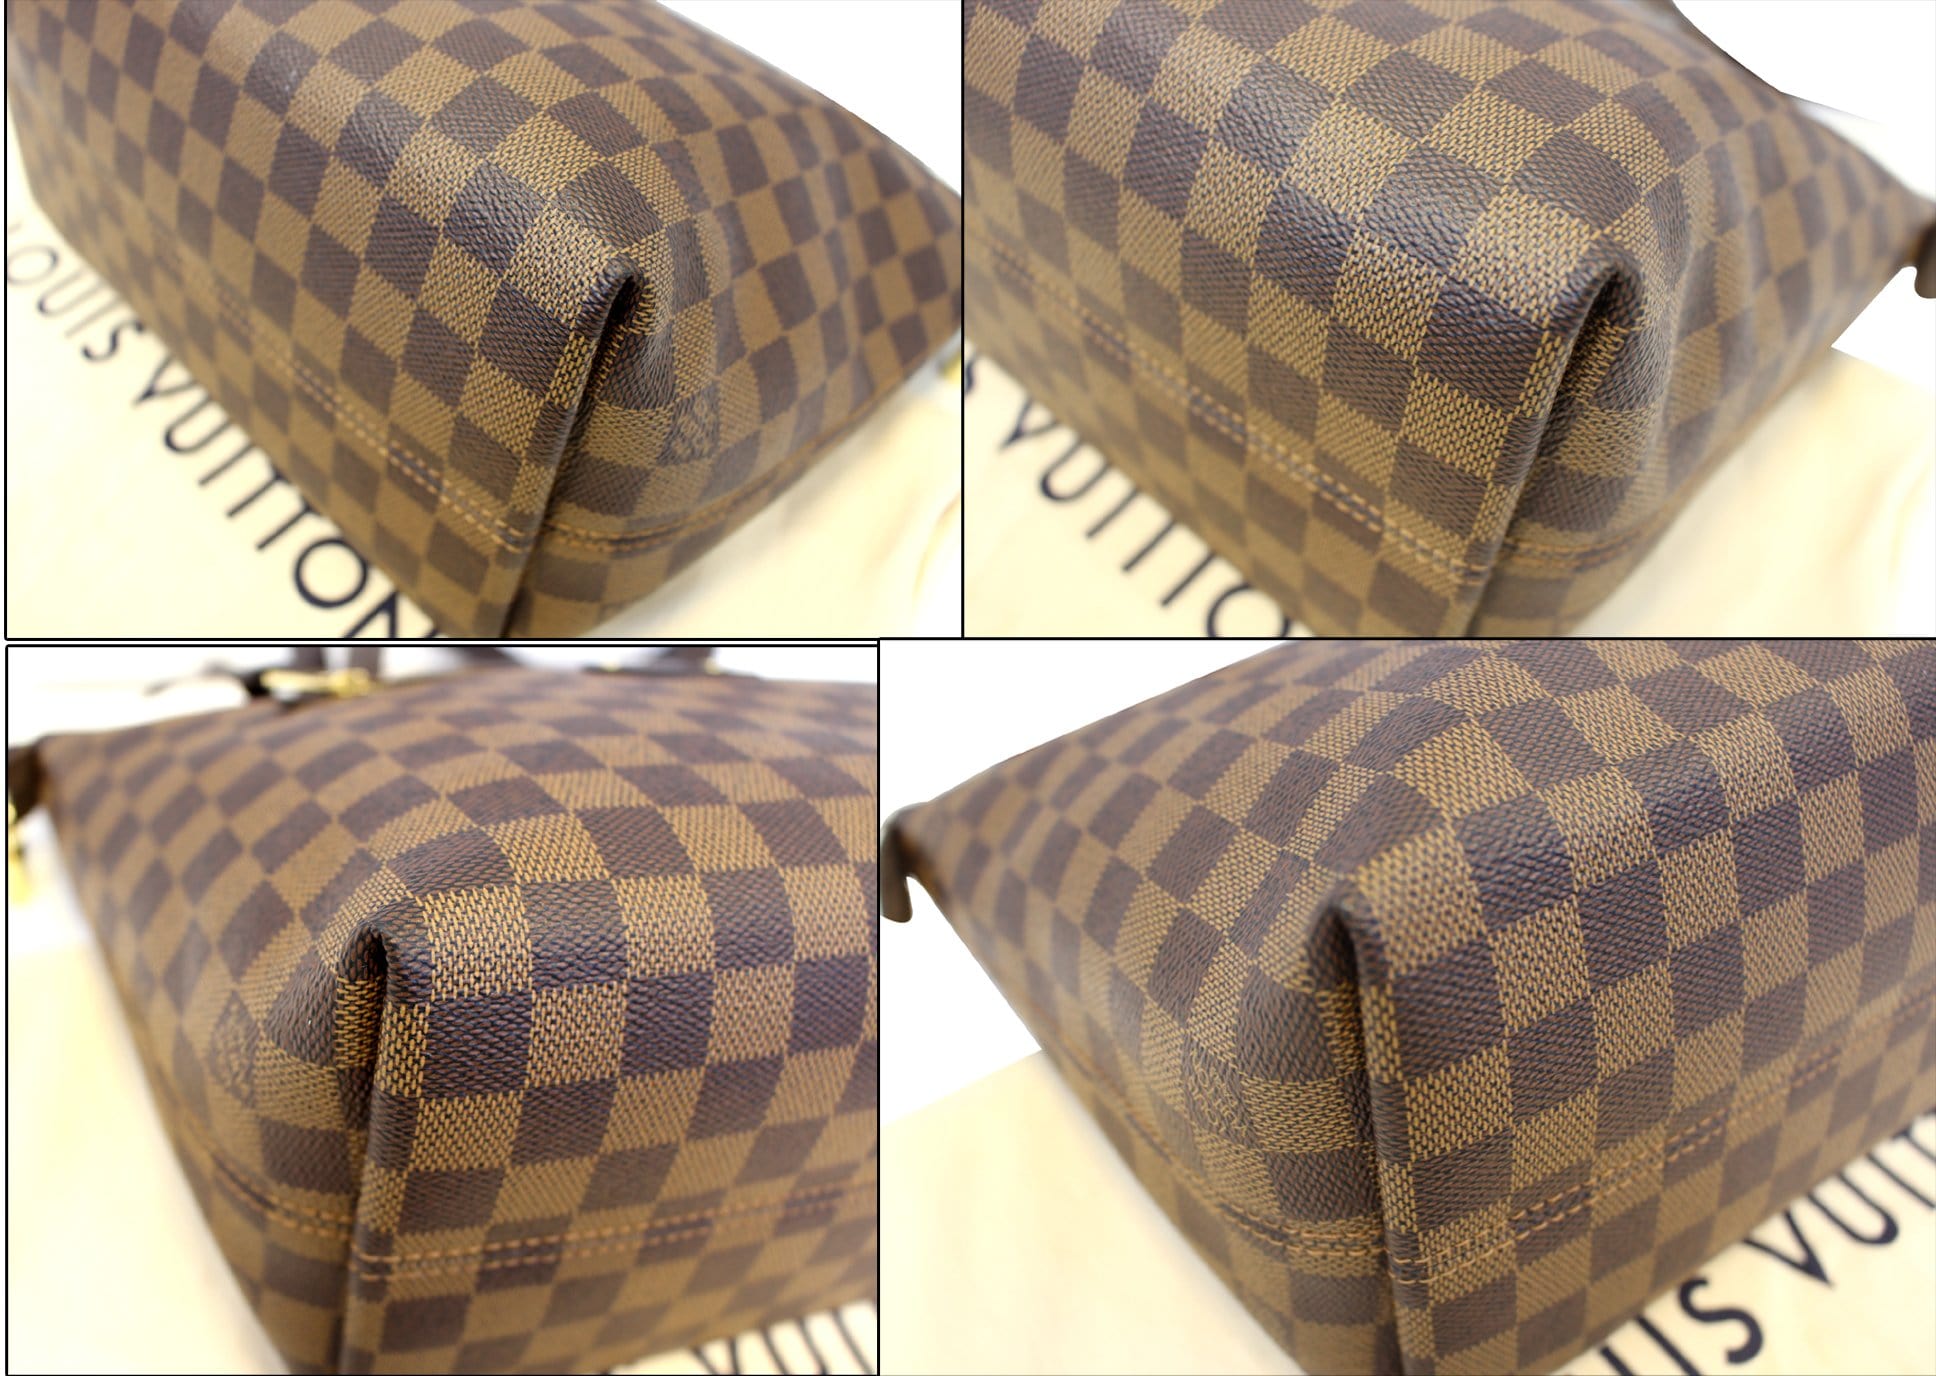 Louis Vuitton Iena Mm - For Sale on 1stDibs